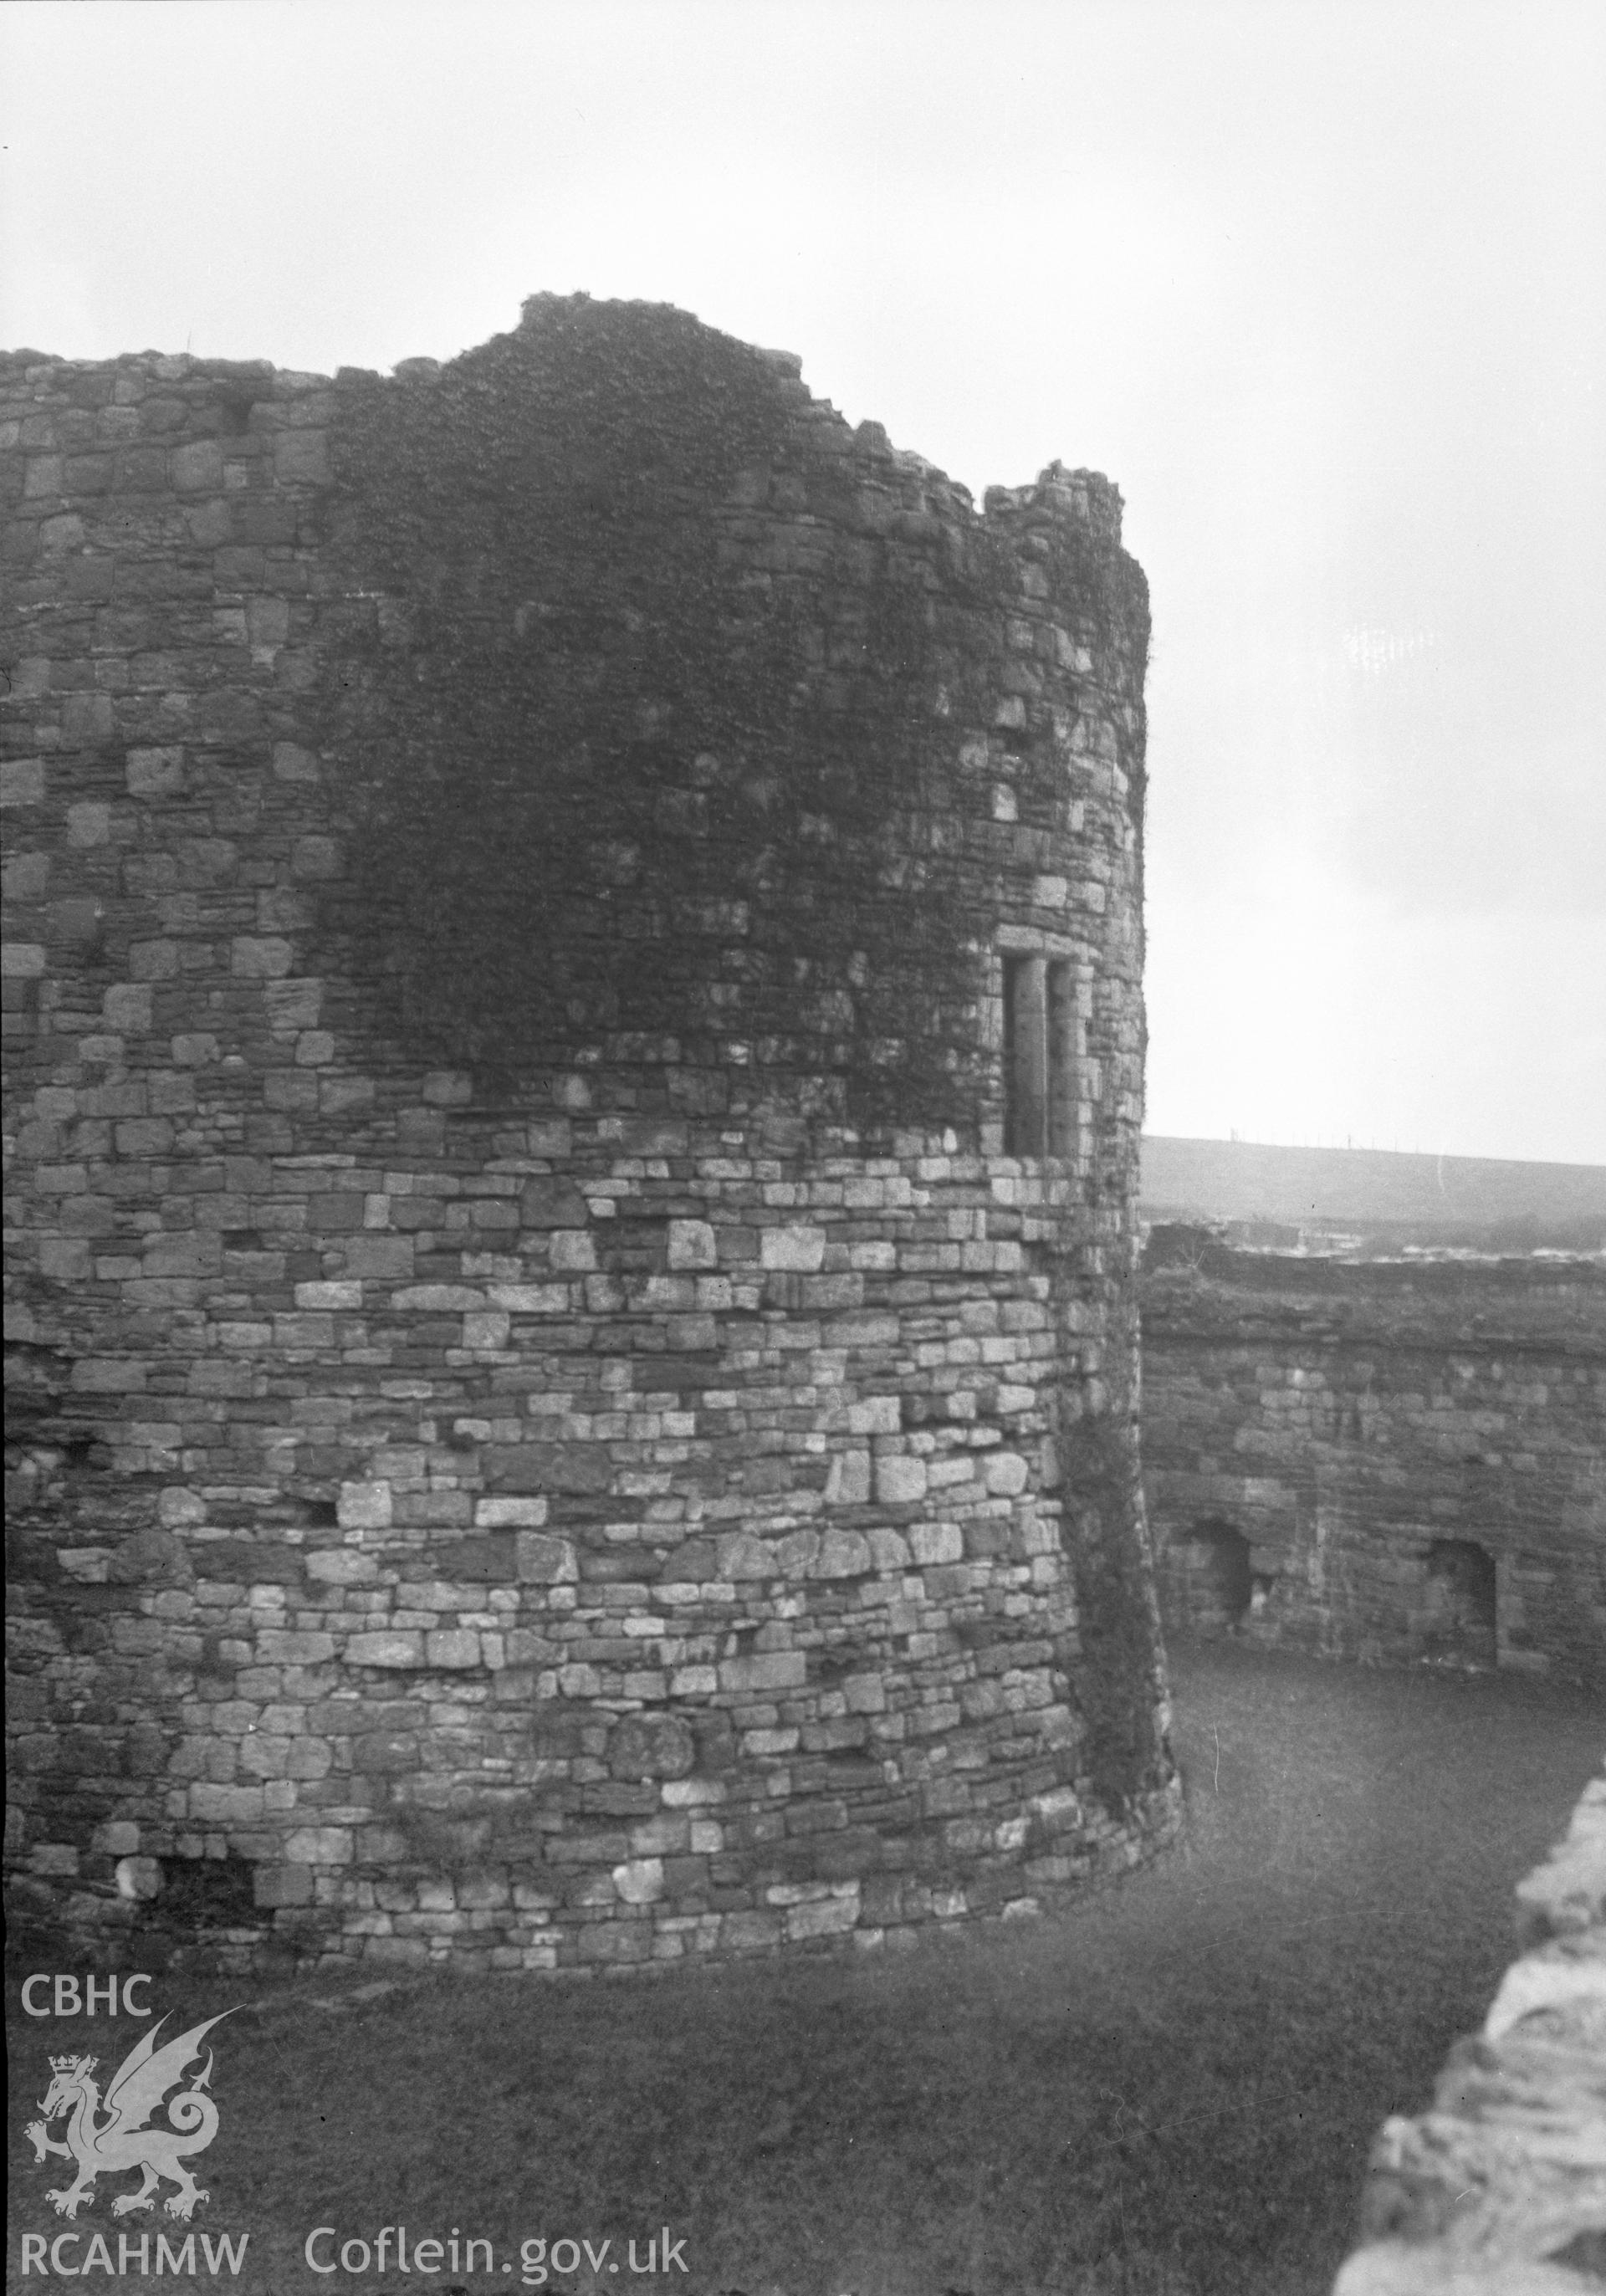 Digital copy of a nitrate negative showing view of Beaumaris Castle.